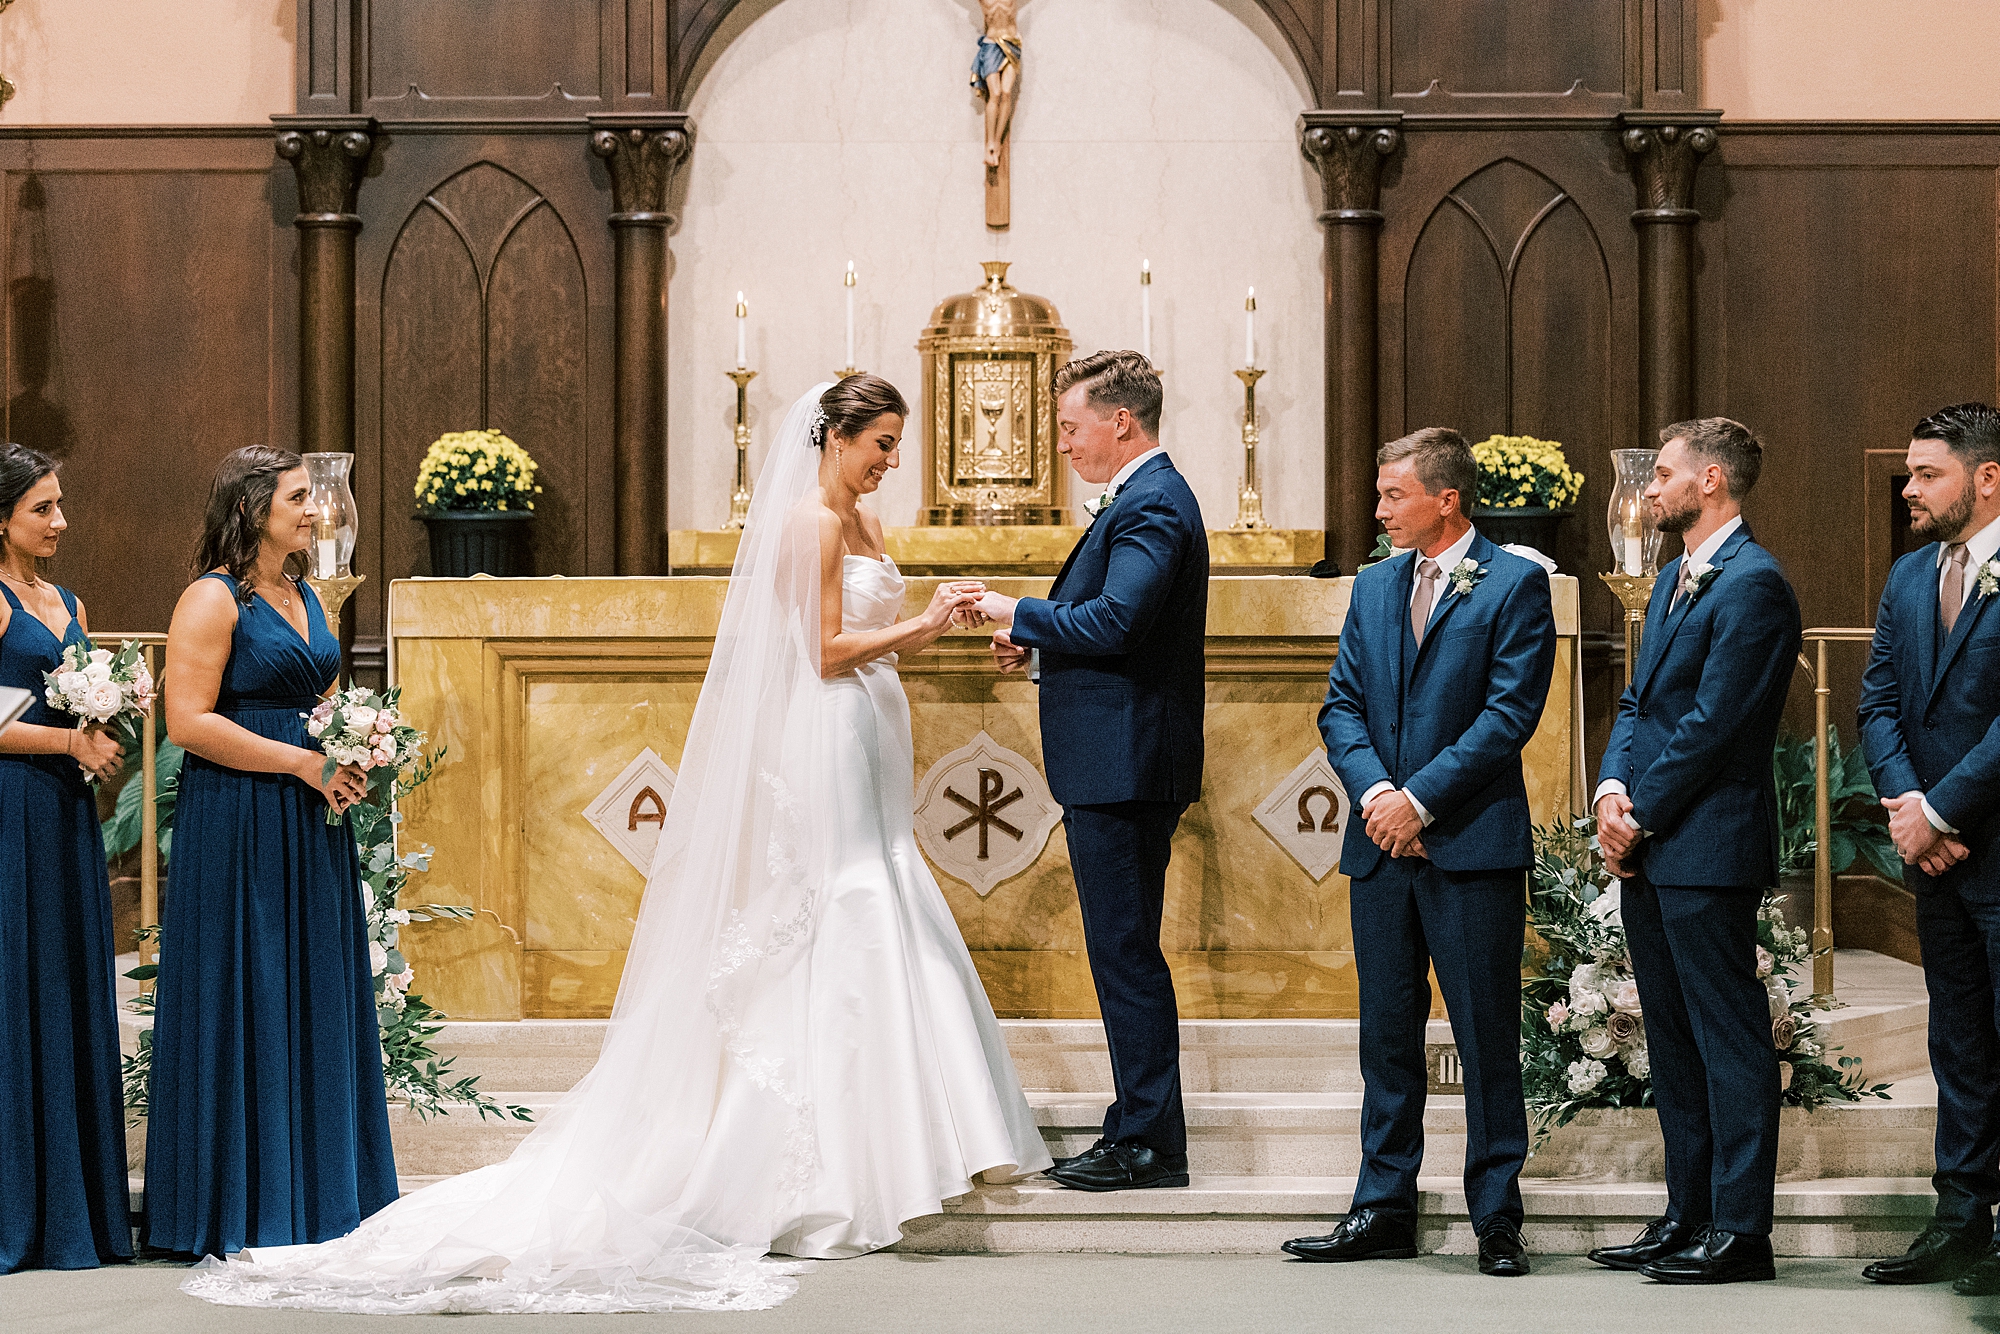 newlyweds hold hands exchanging vows during traditional wedding ceremony at Philadelphia PA church